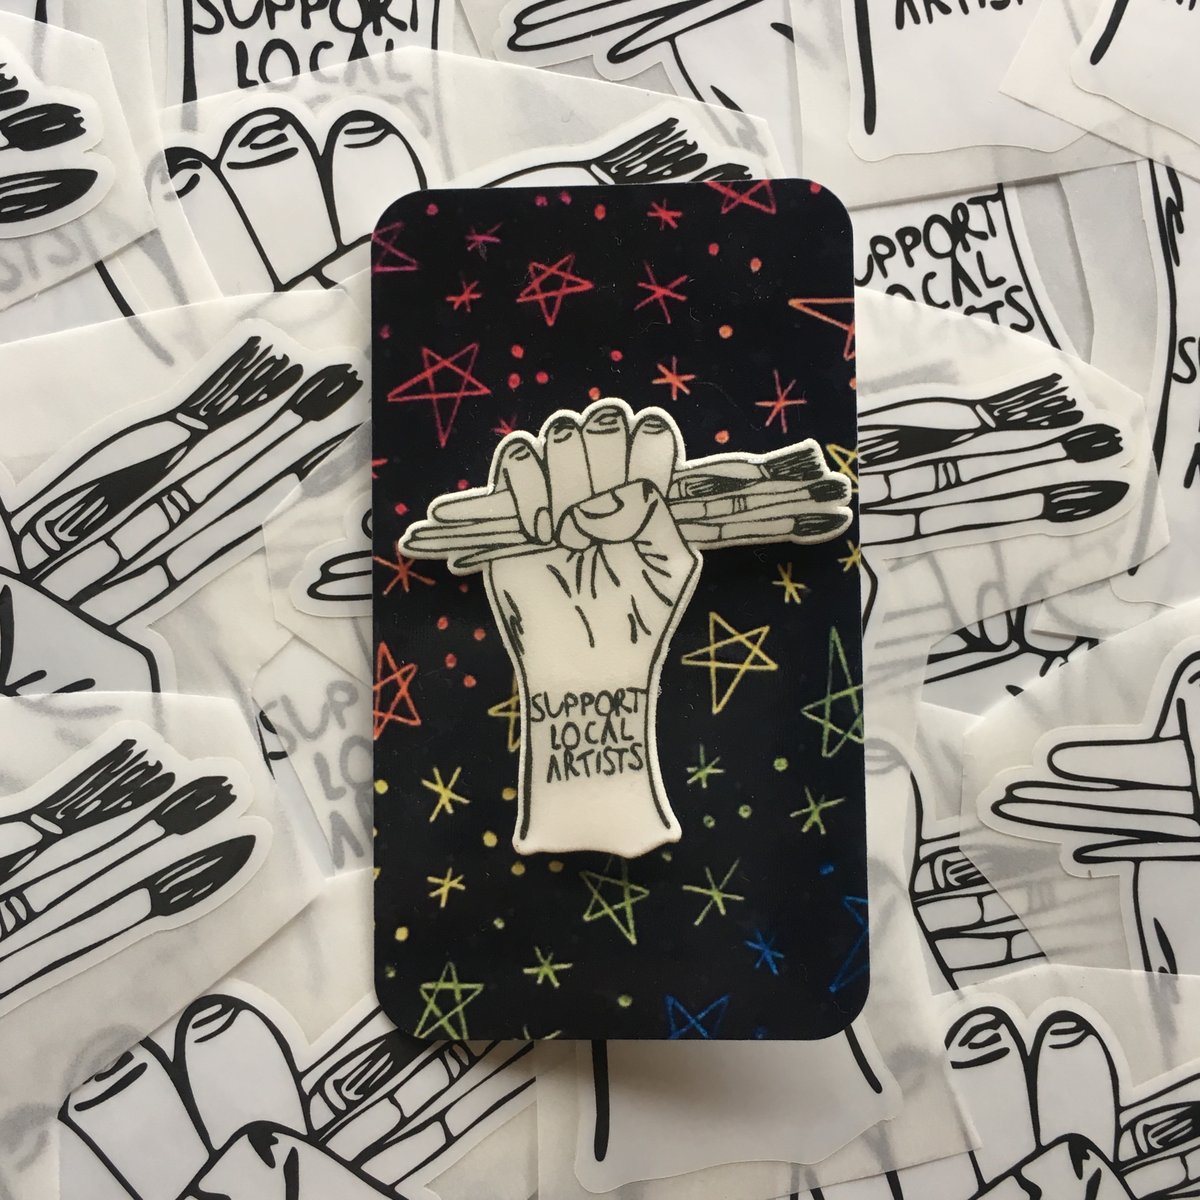 Image of Support Local Artist Pins and stickers